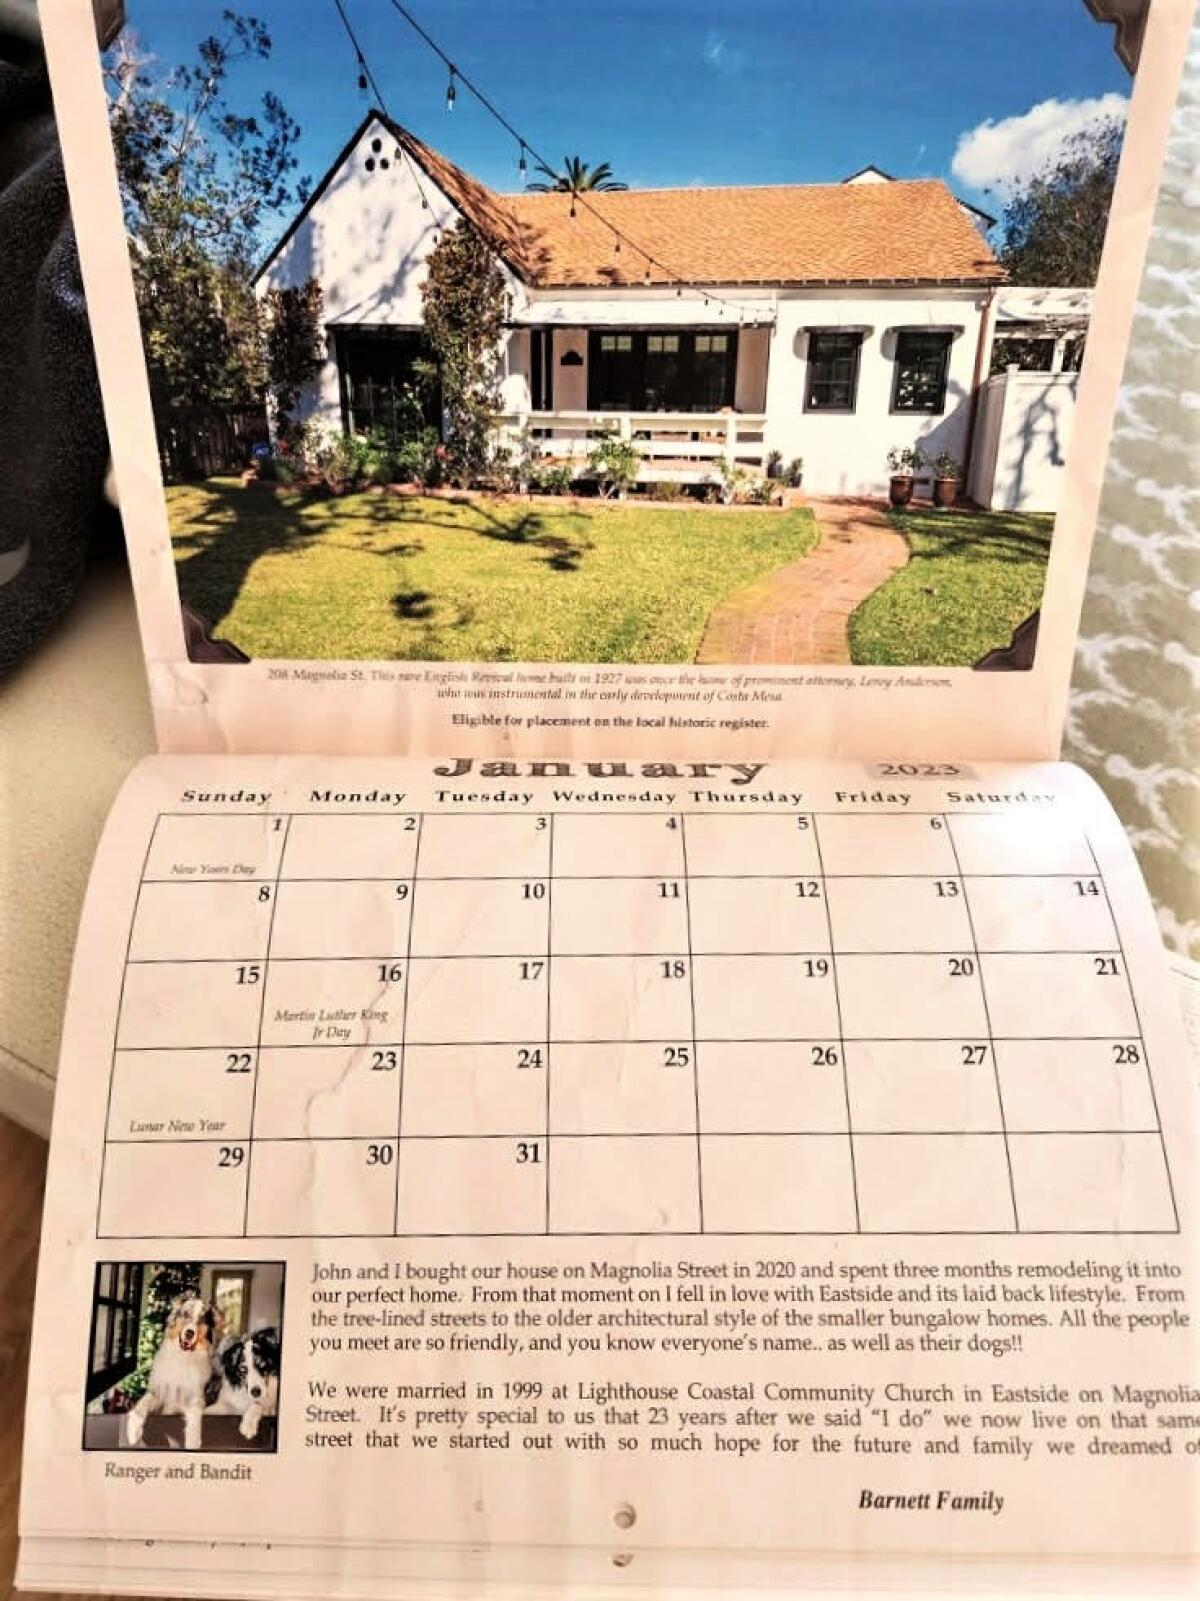 A property at 208 Magnolia St. in Costa Mesa is featured in a 2023 calendar of historic homes.